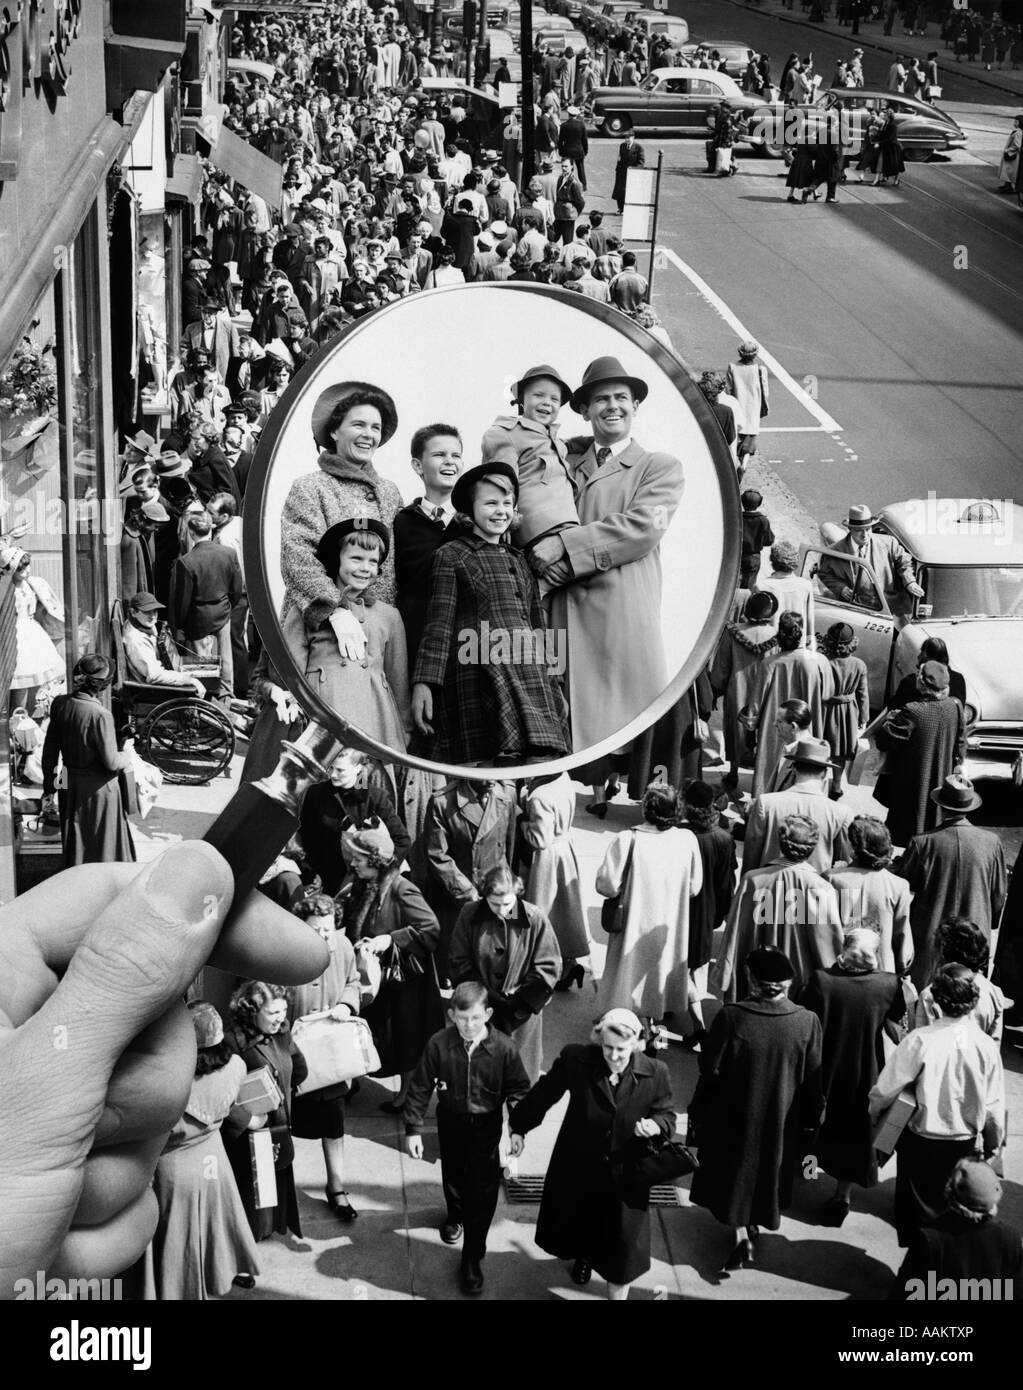 1950s MONTAGE OF FAMILY IN MAGNIFYING GLASS SUPERIMPOSED OVER CROWDED SIDEWALK Stock Photo